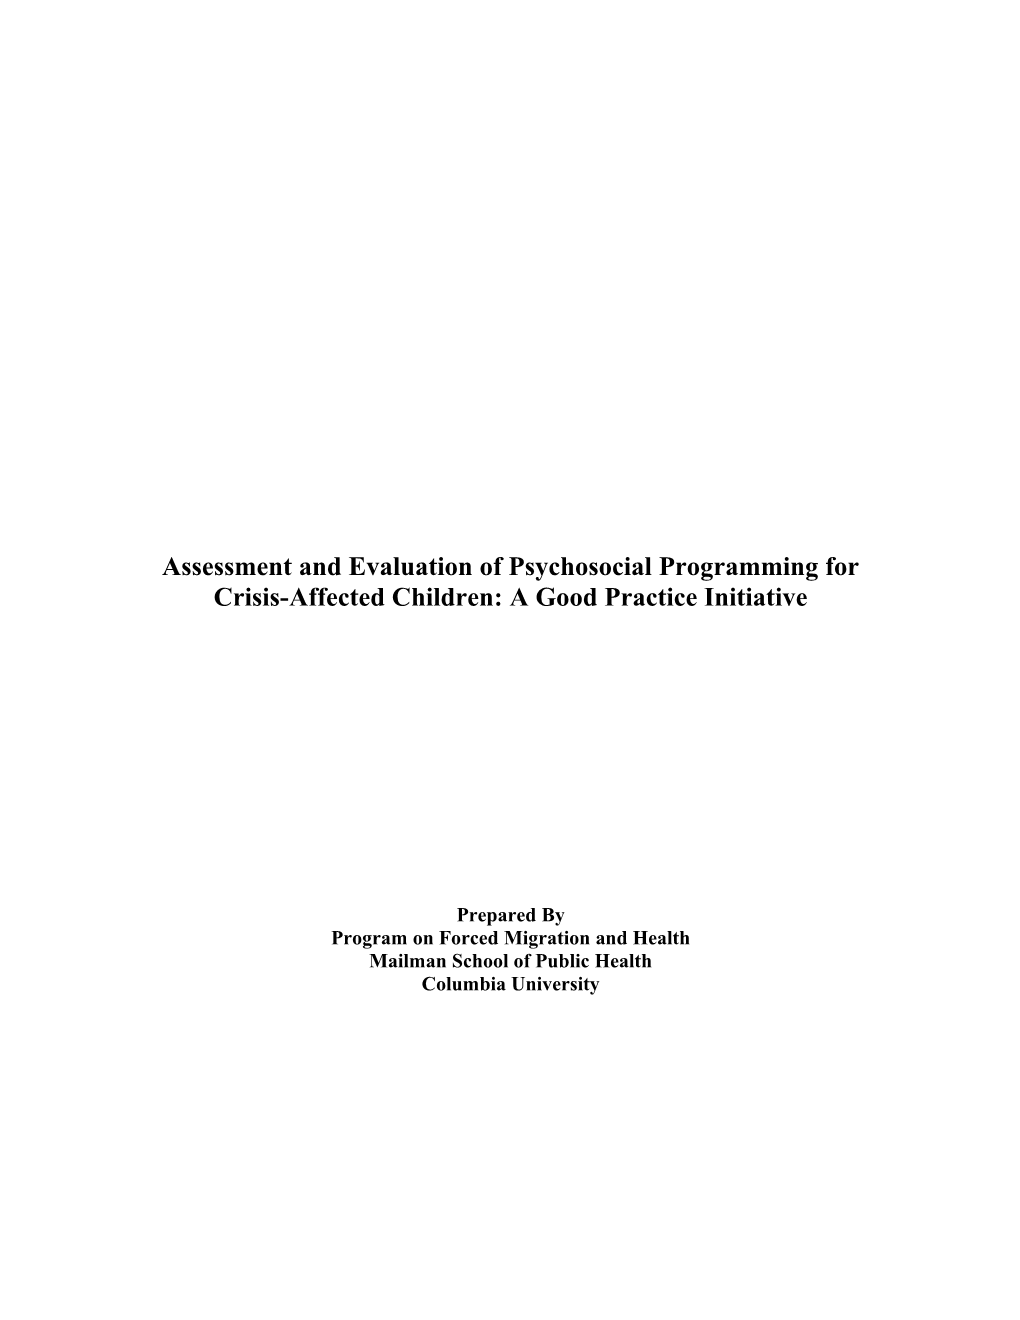 Assessment and Evaluation of Psychosocial Programming For